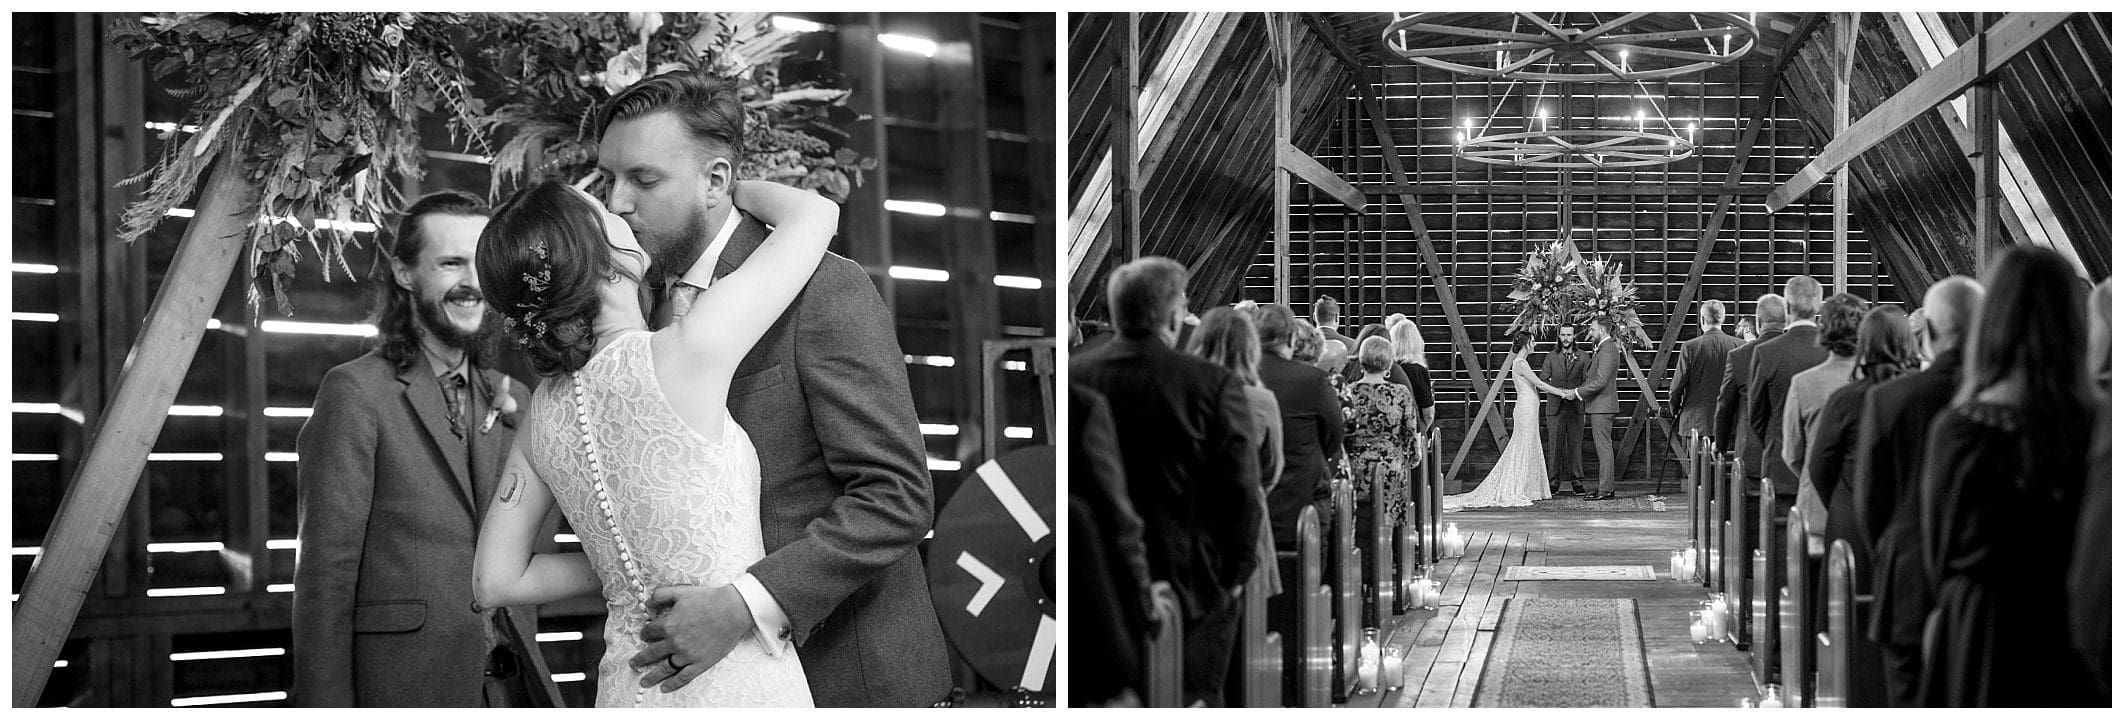 black and white photo of bride and groom's first kiss at wedding ceremony Asheville wedding photographer Kathy Beaver